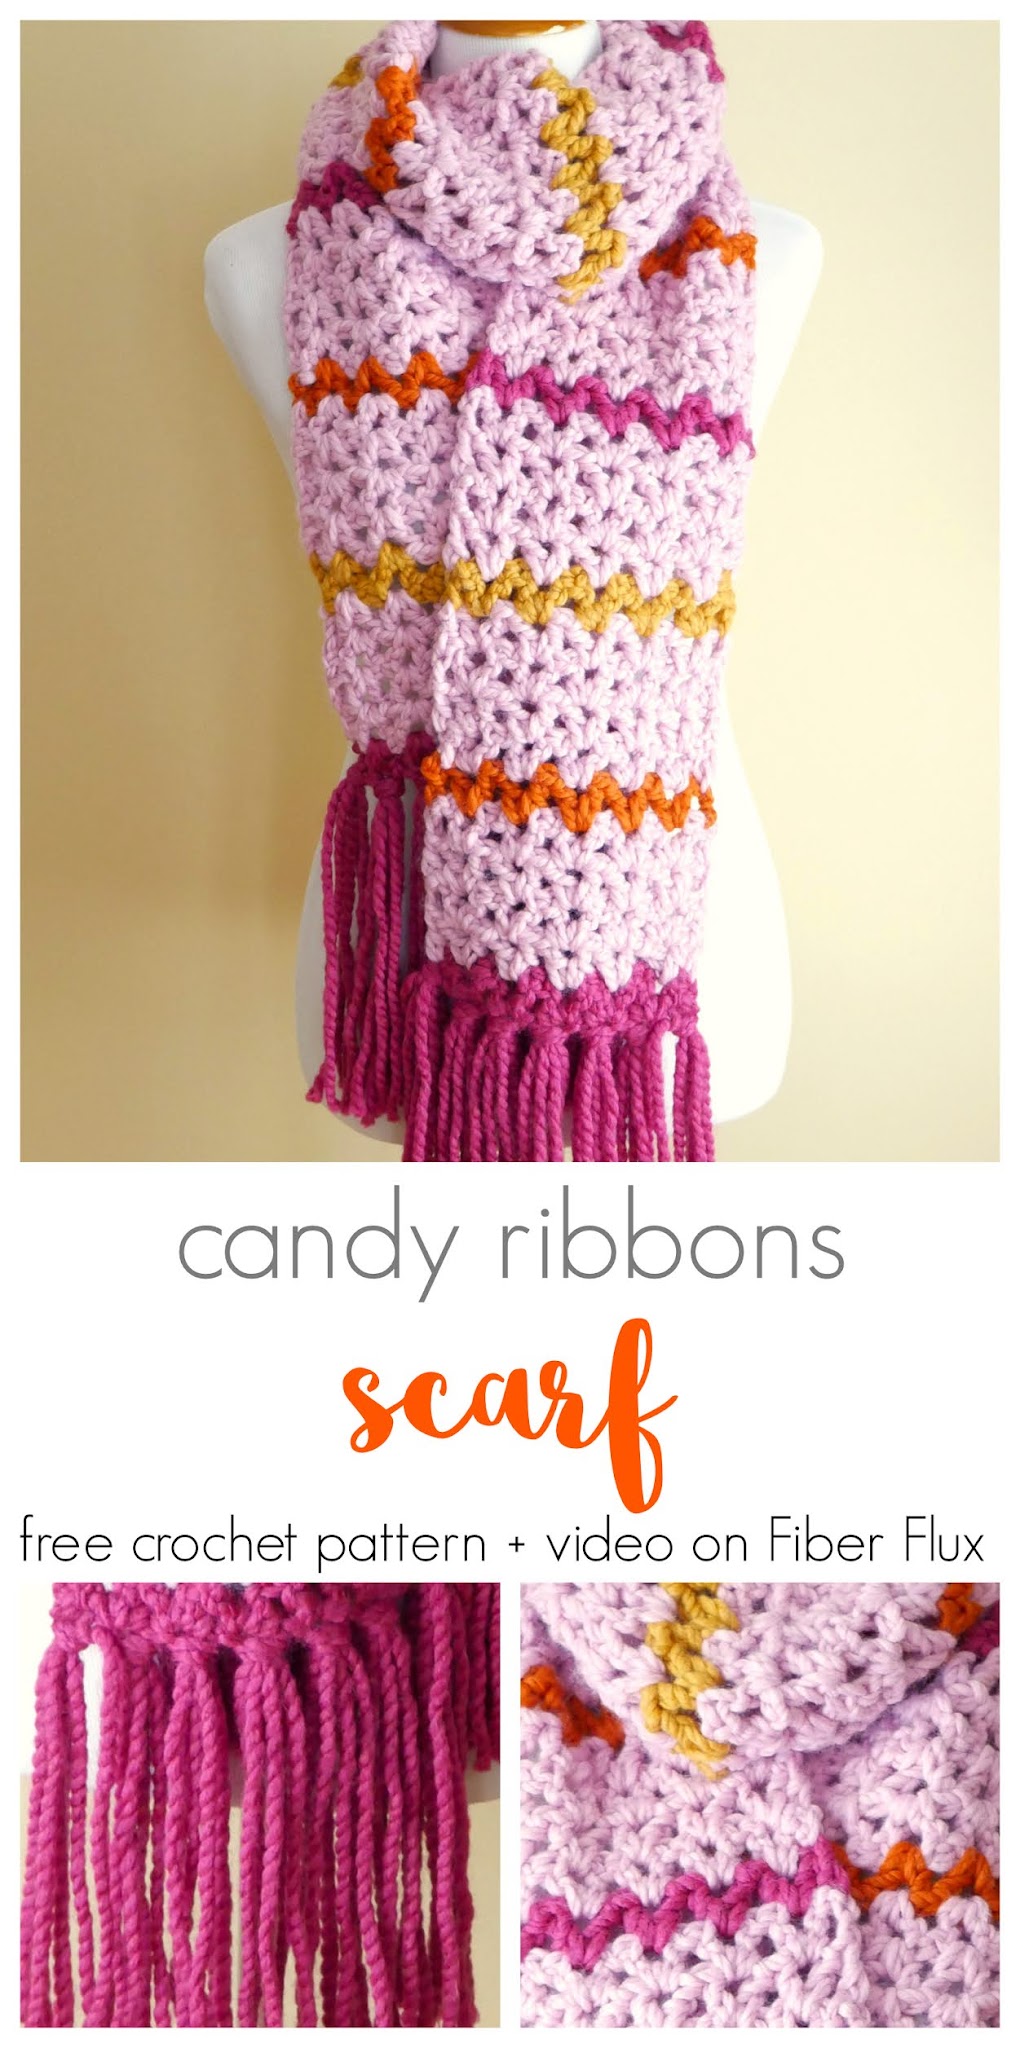 Candy Ribbons Crochet Scarf